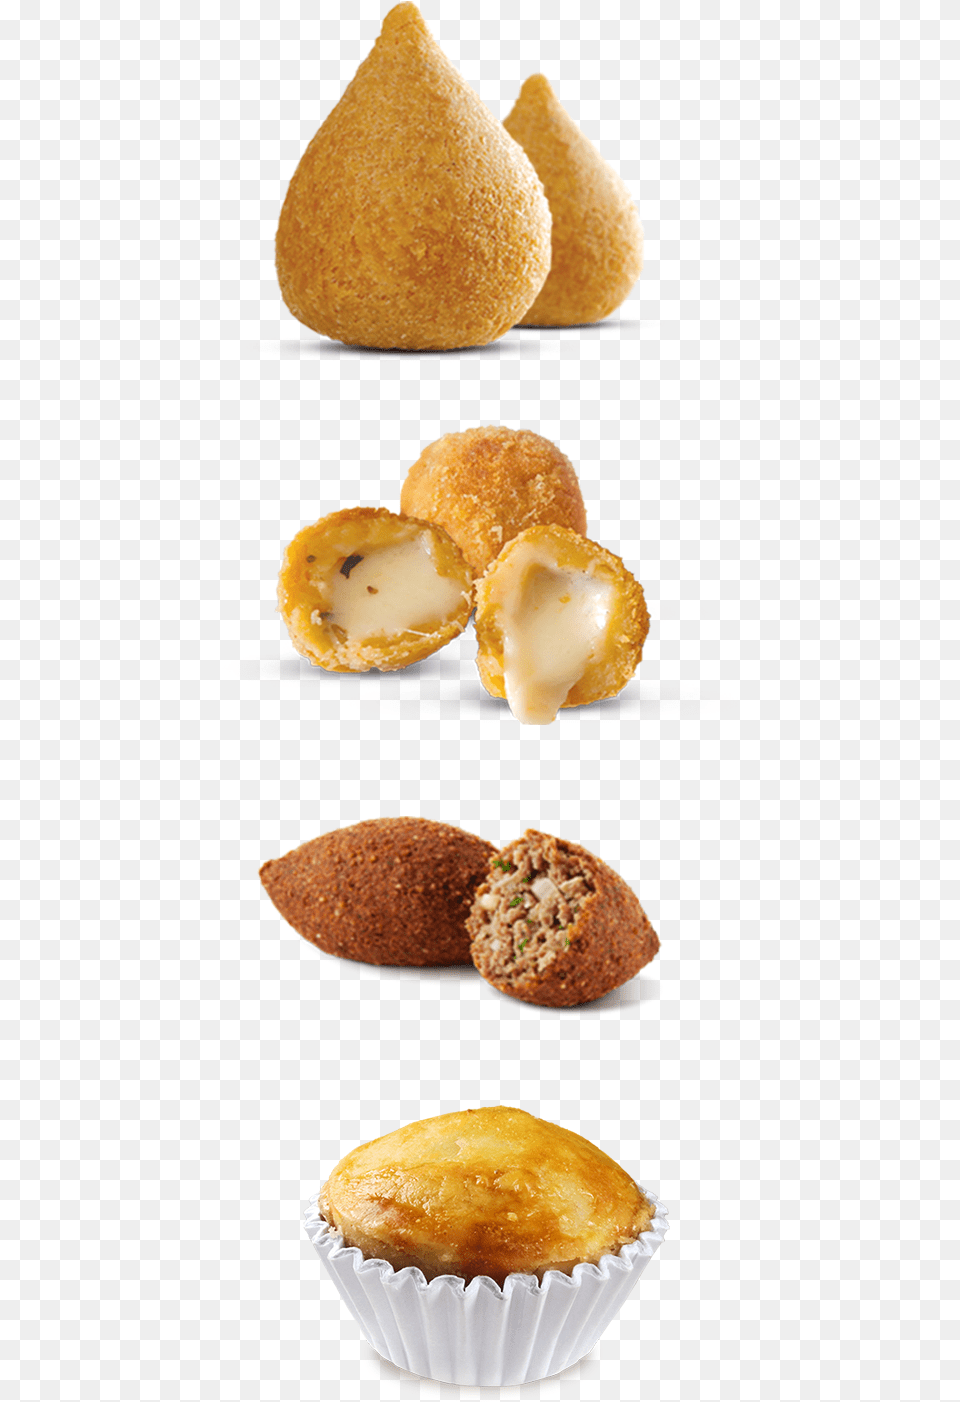 Baked Goods, Bread, Food, Fruit, Pear Png Image